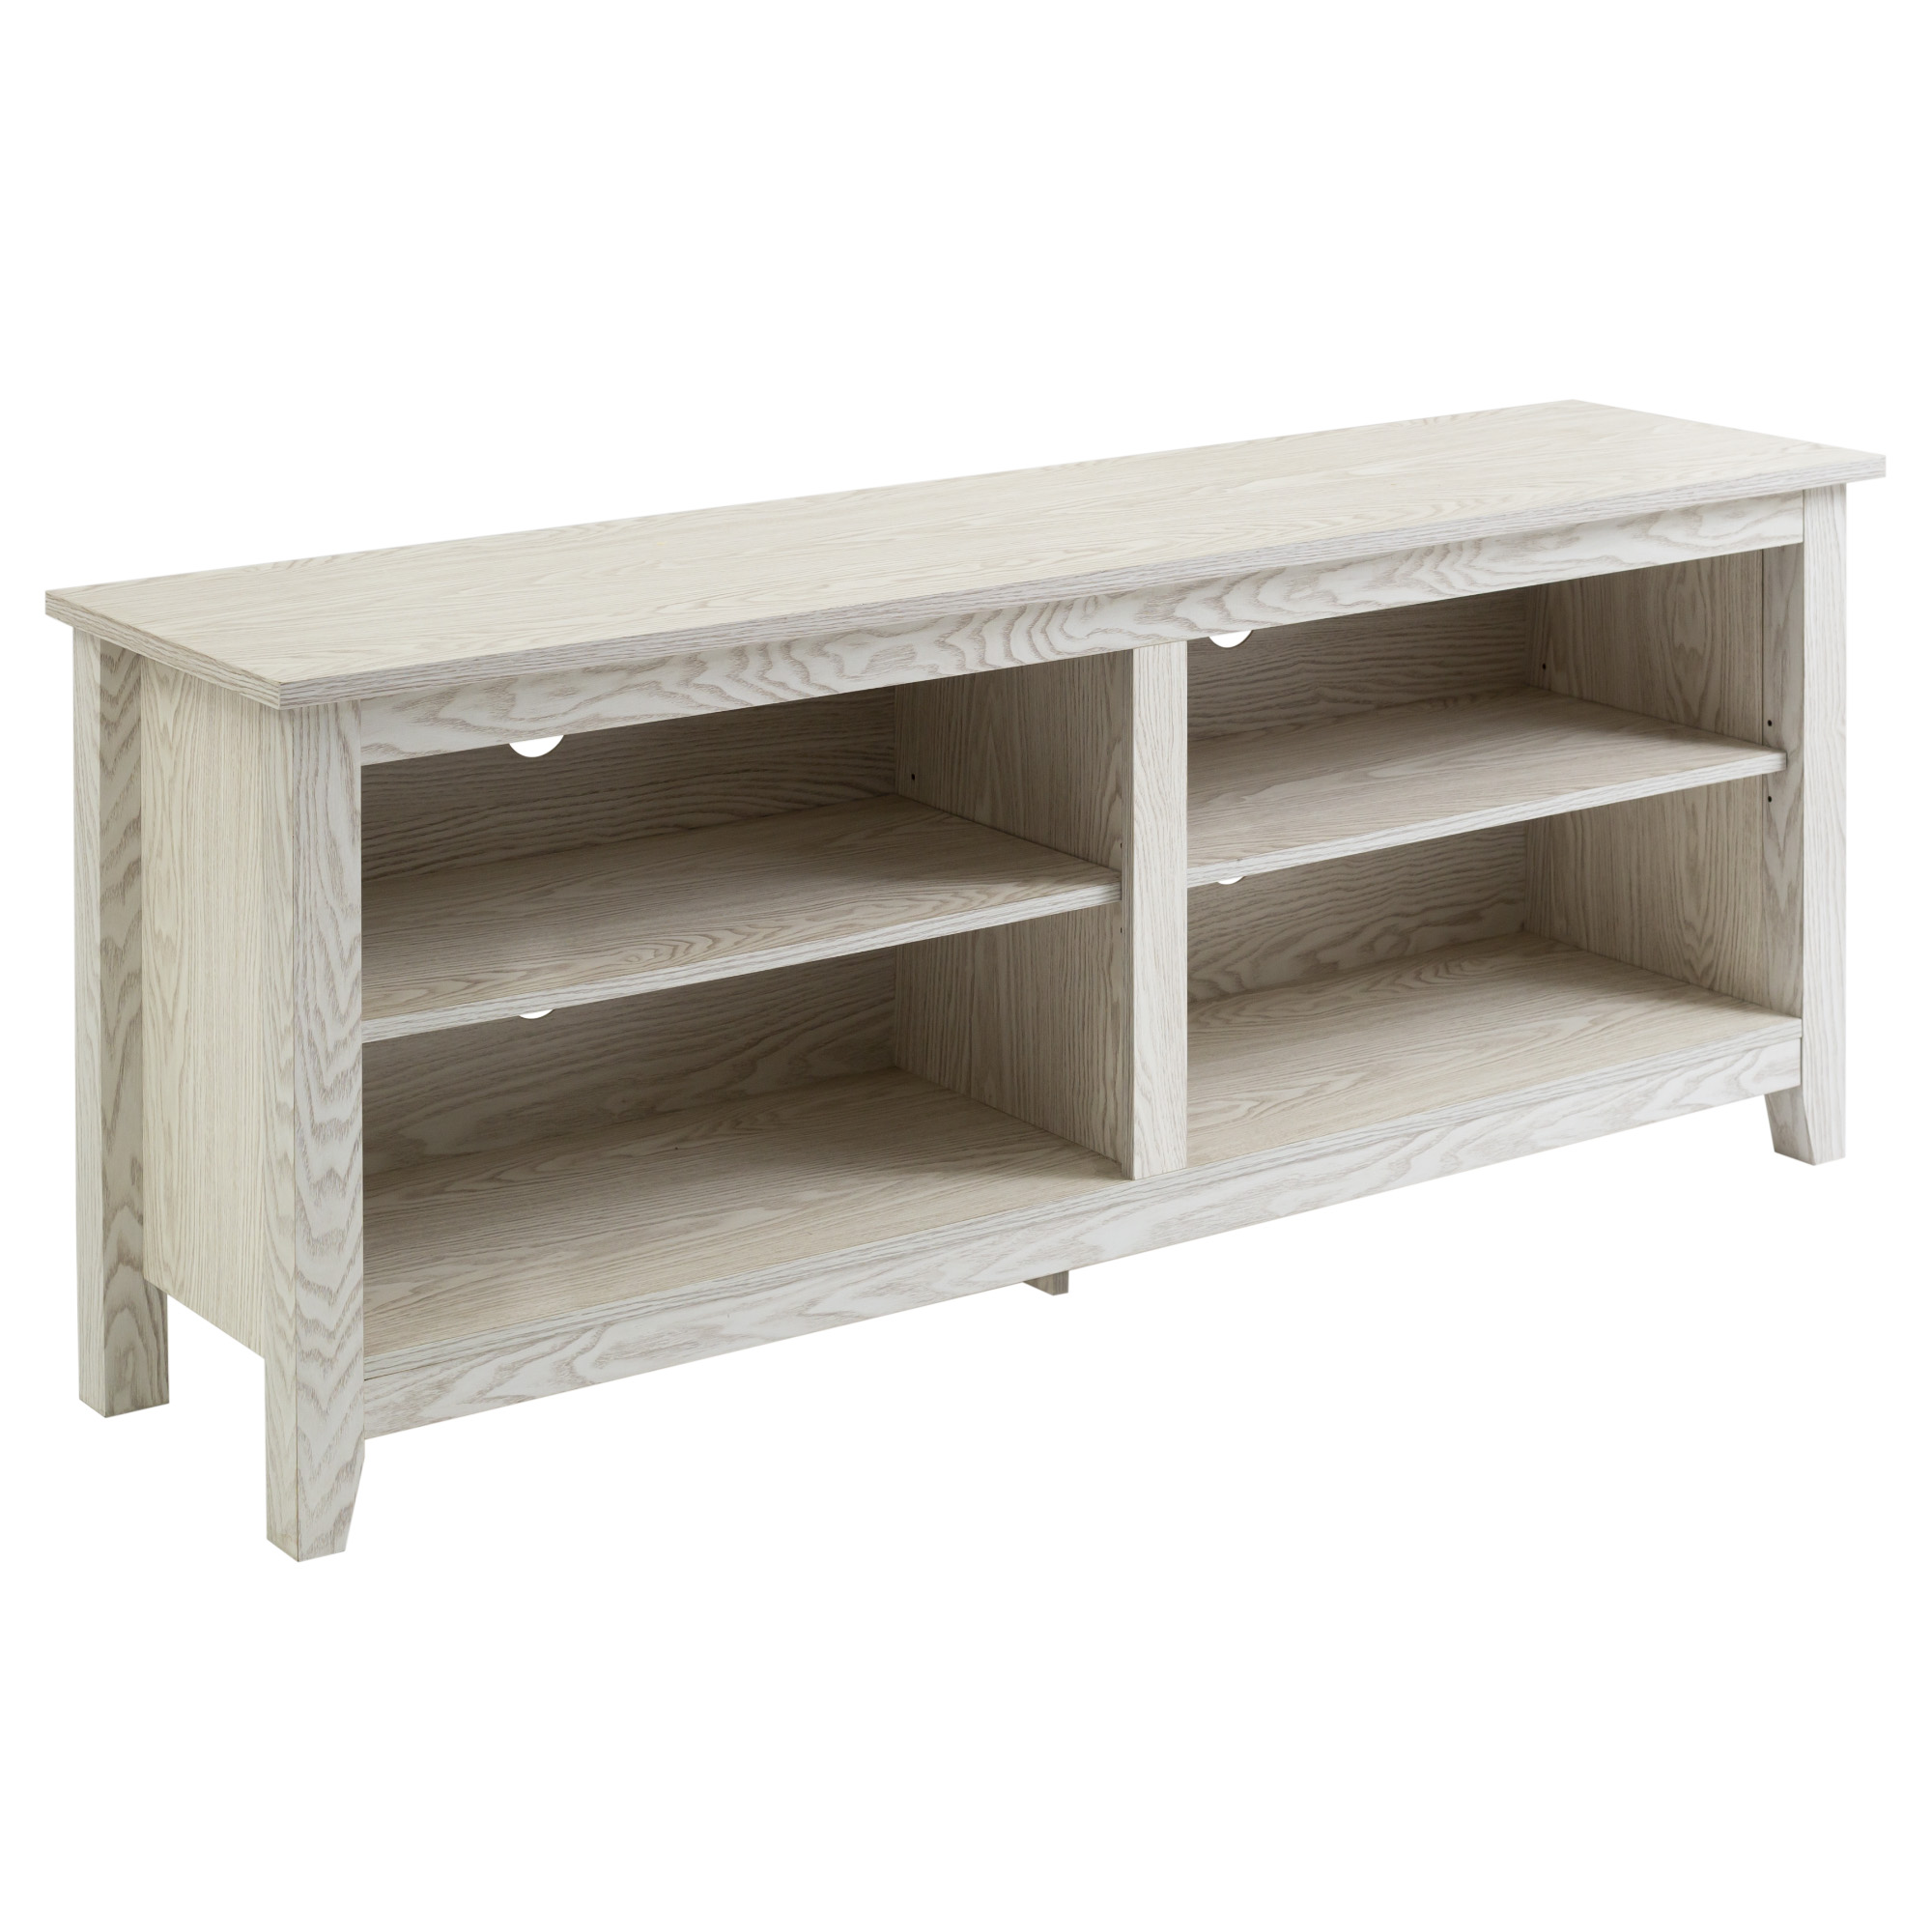 Manor Park Open Storage TV Stand for TVs up to 65", White Wash - image 4 of 11